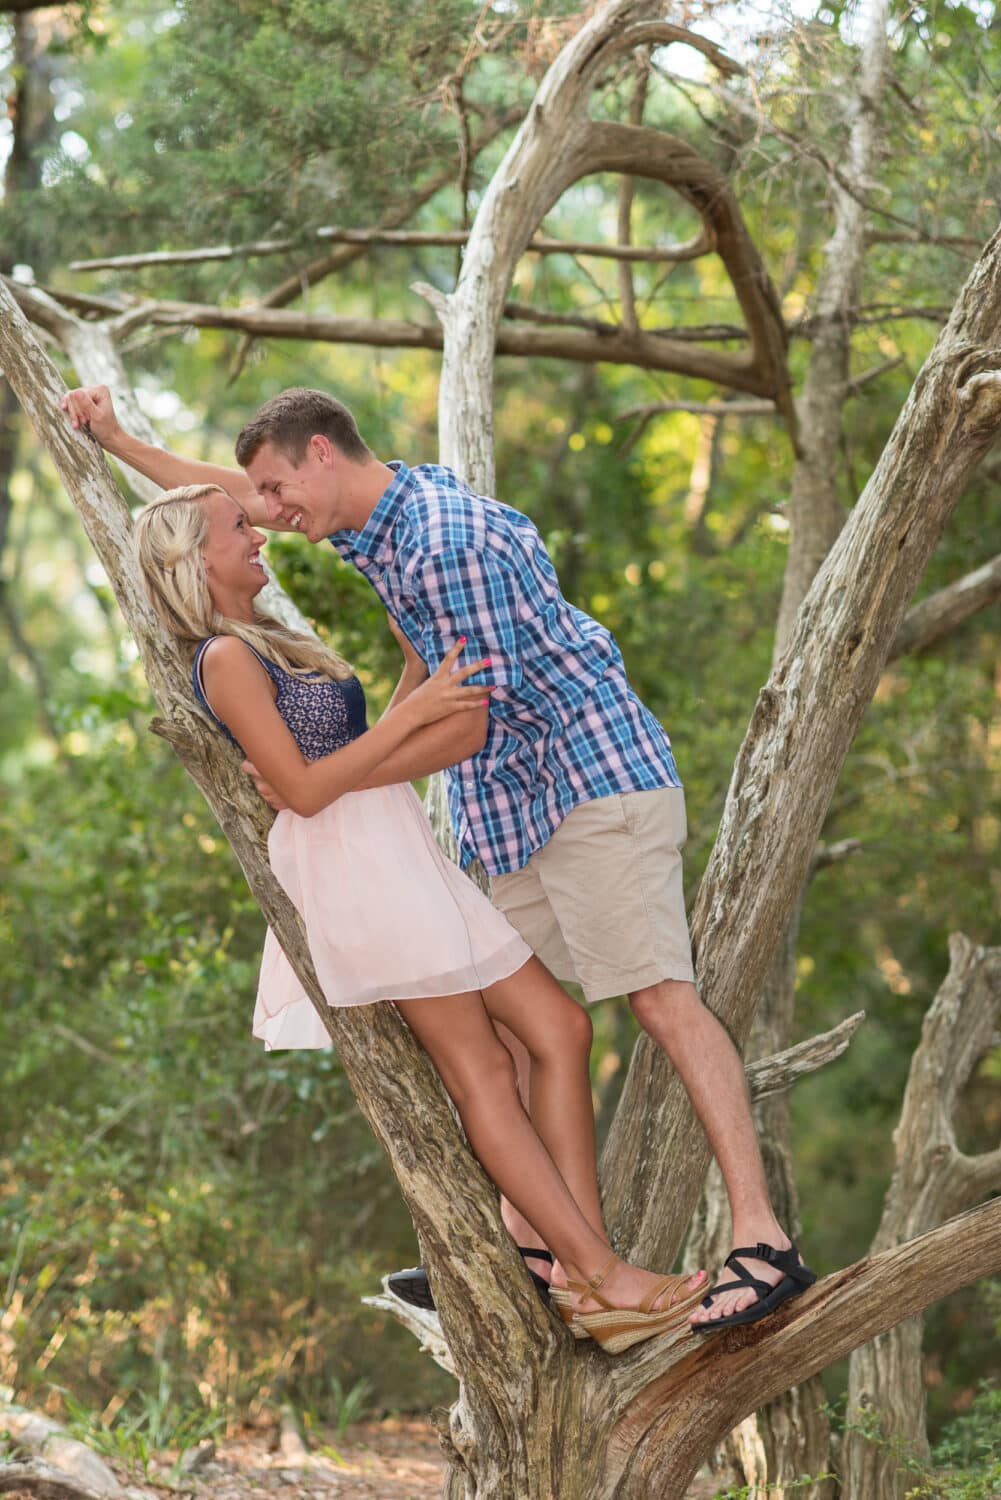 Couple having fun climbing an old tree together - Myrtle Beach State Park